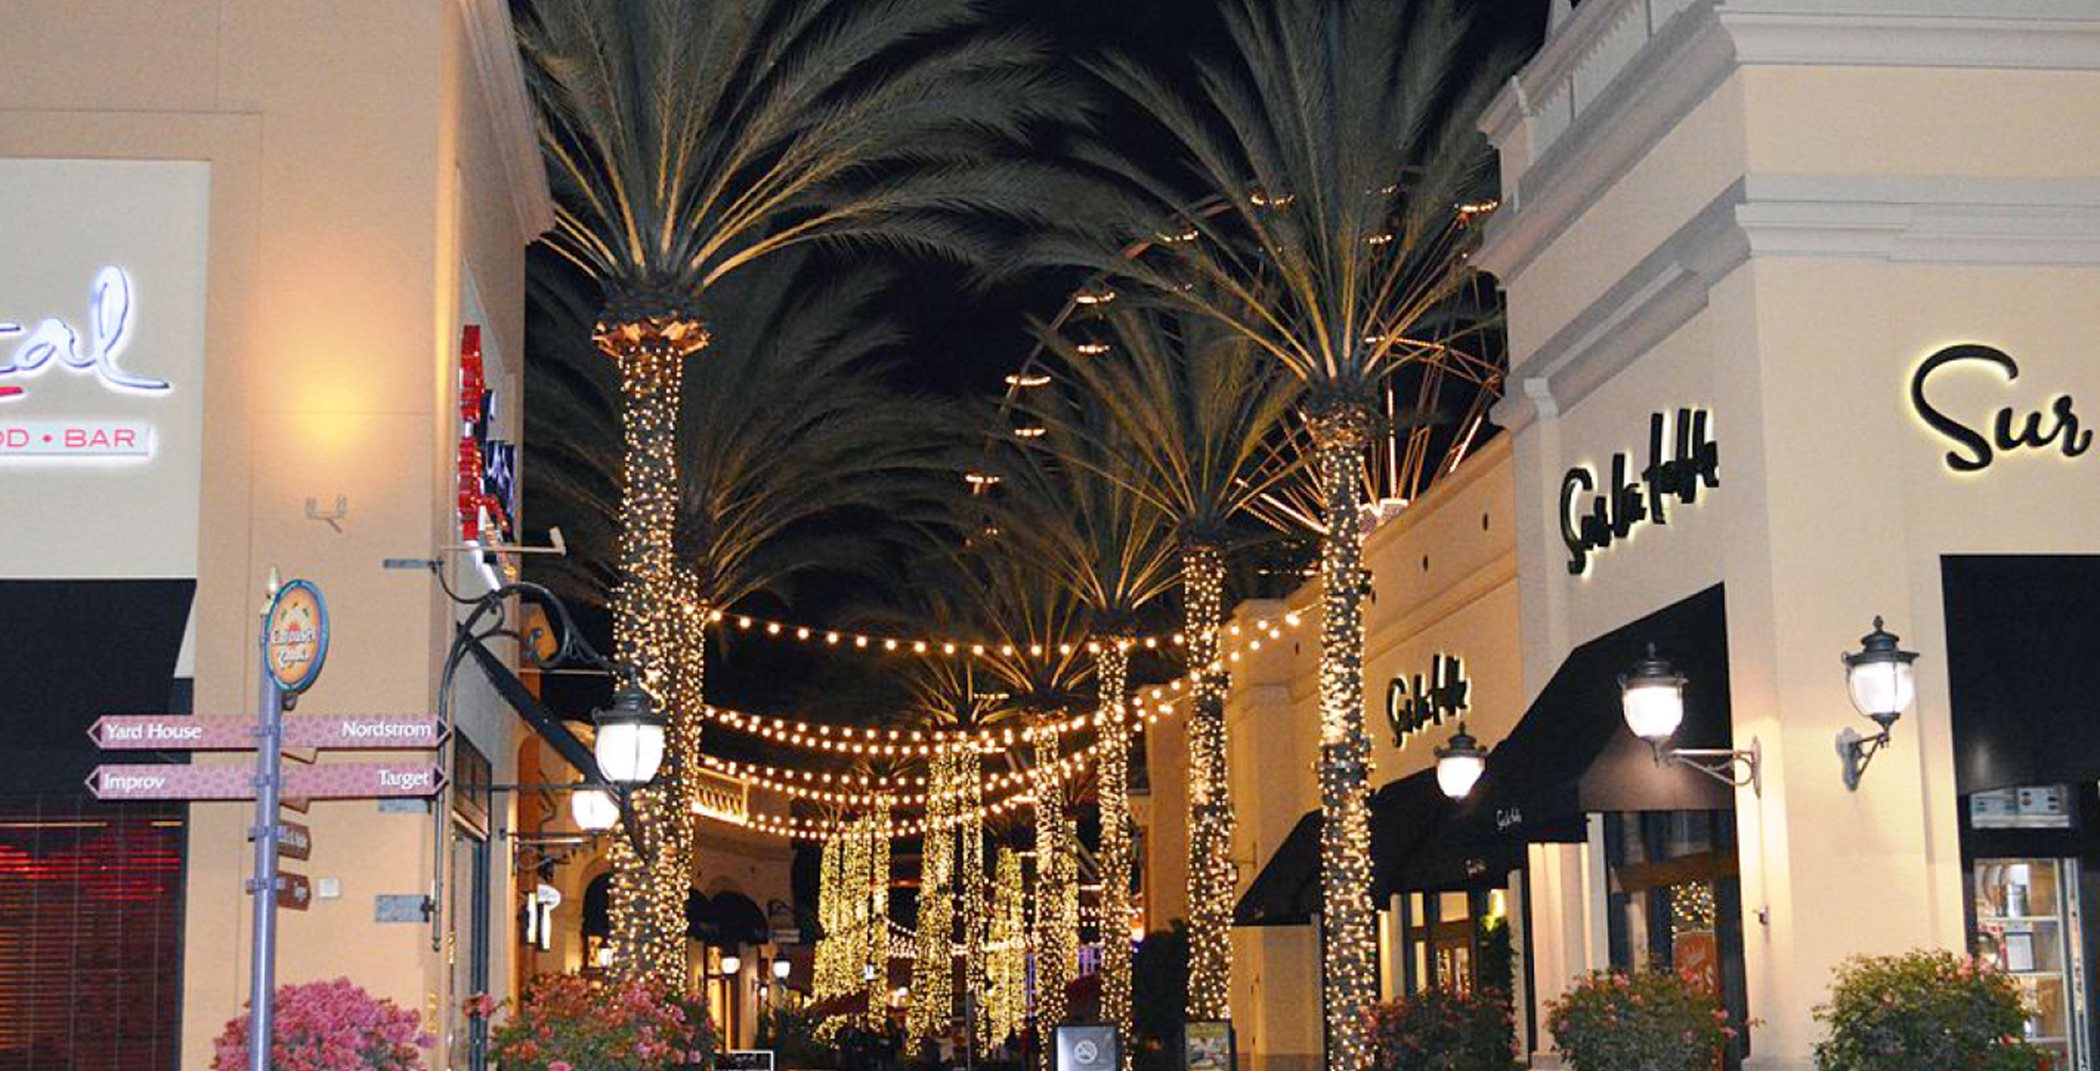 Irvine Spectrum outdoor mall with palm trees and fairy lights at night